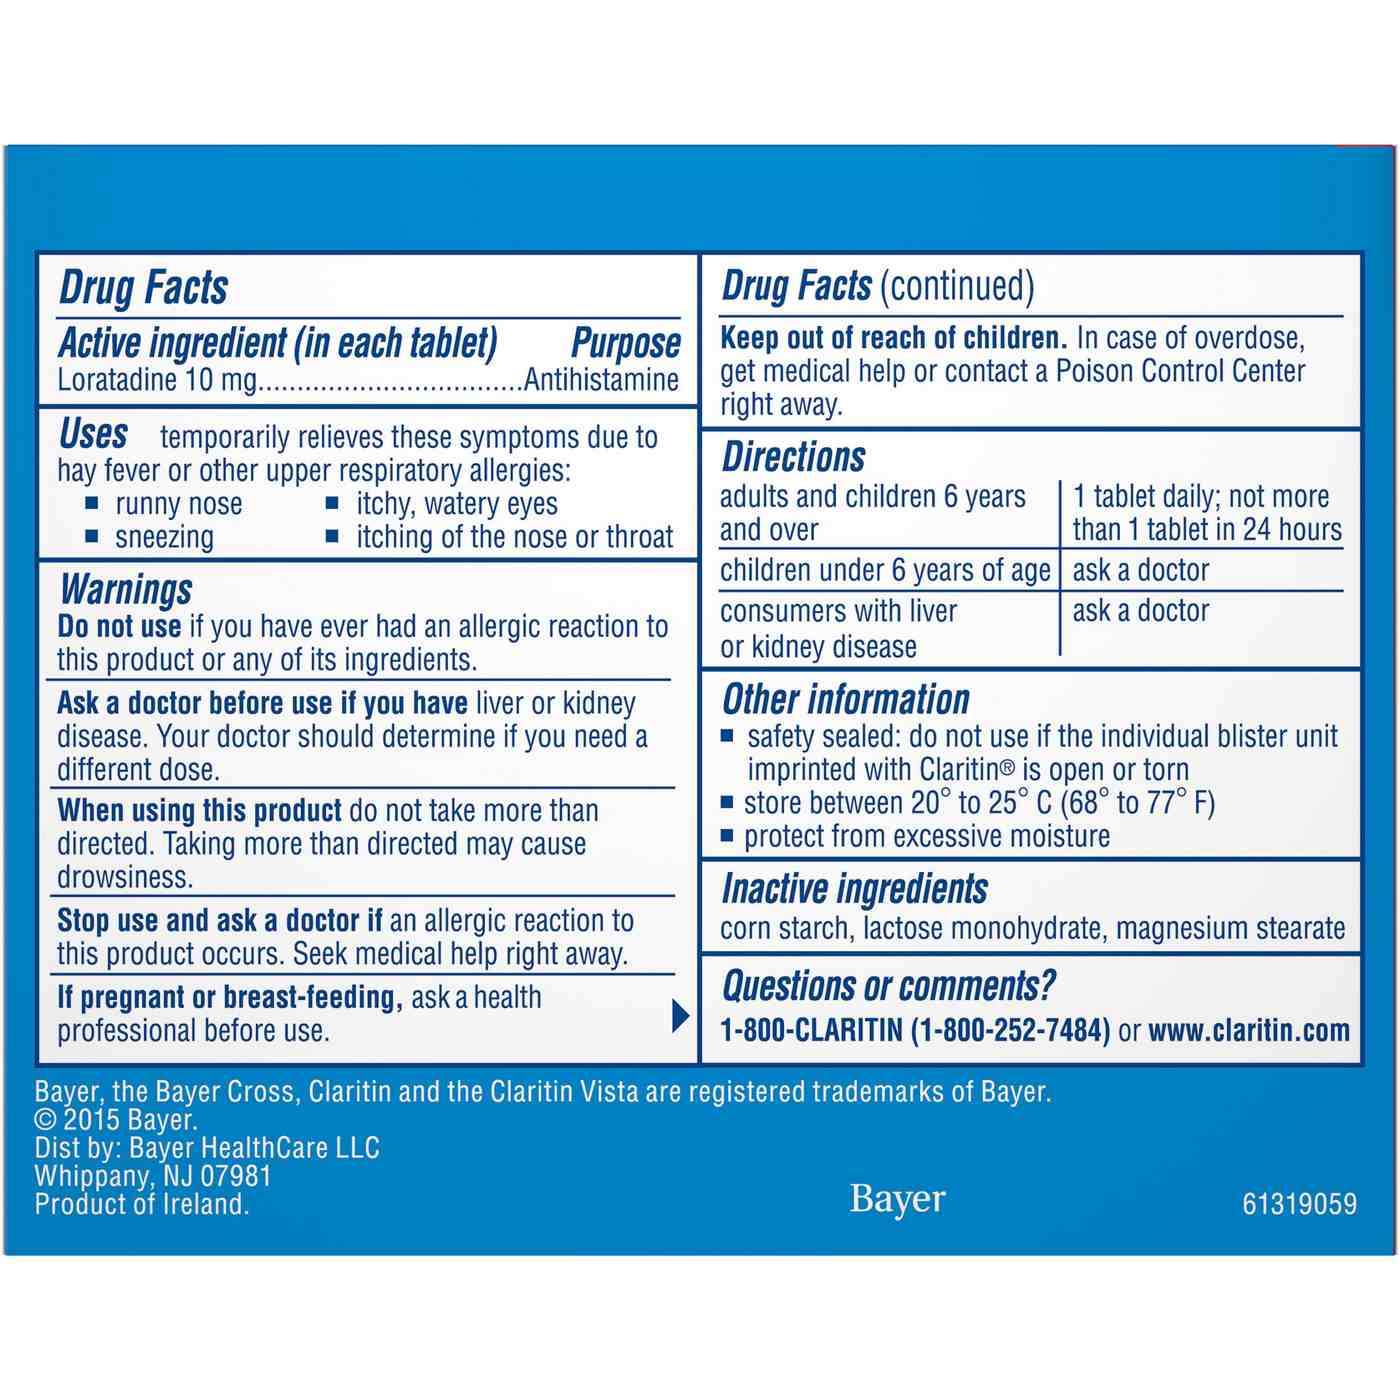 Claritin Non-Drowsy 24 Hour Allergy Relief Tablets; image 2 of 2